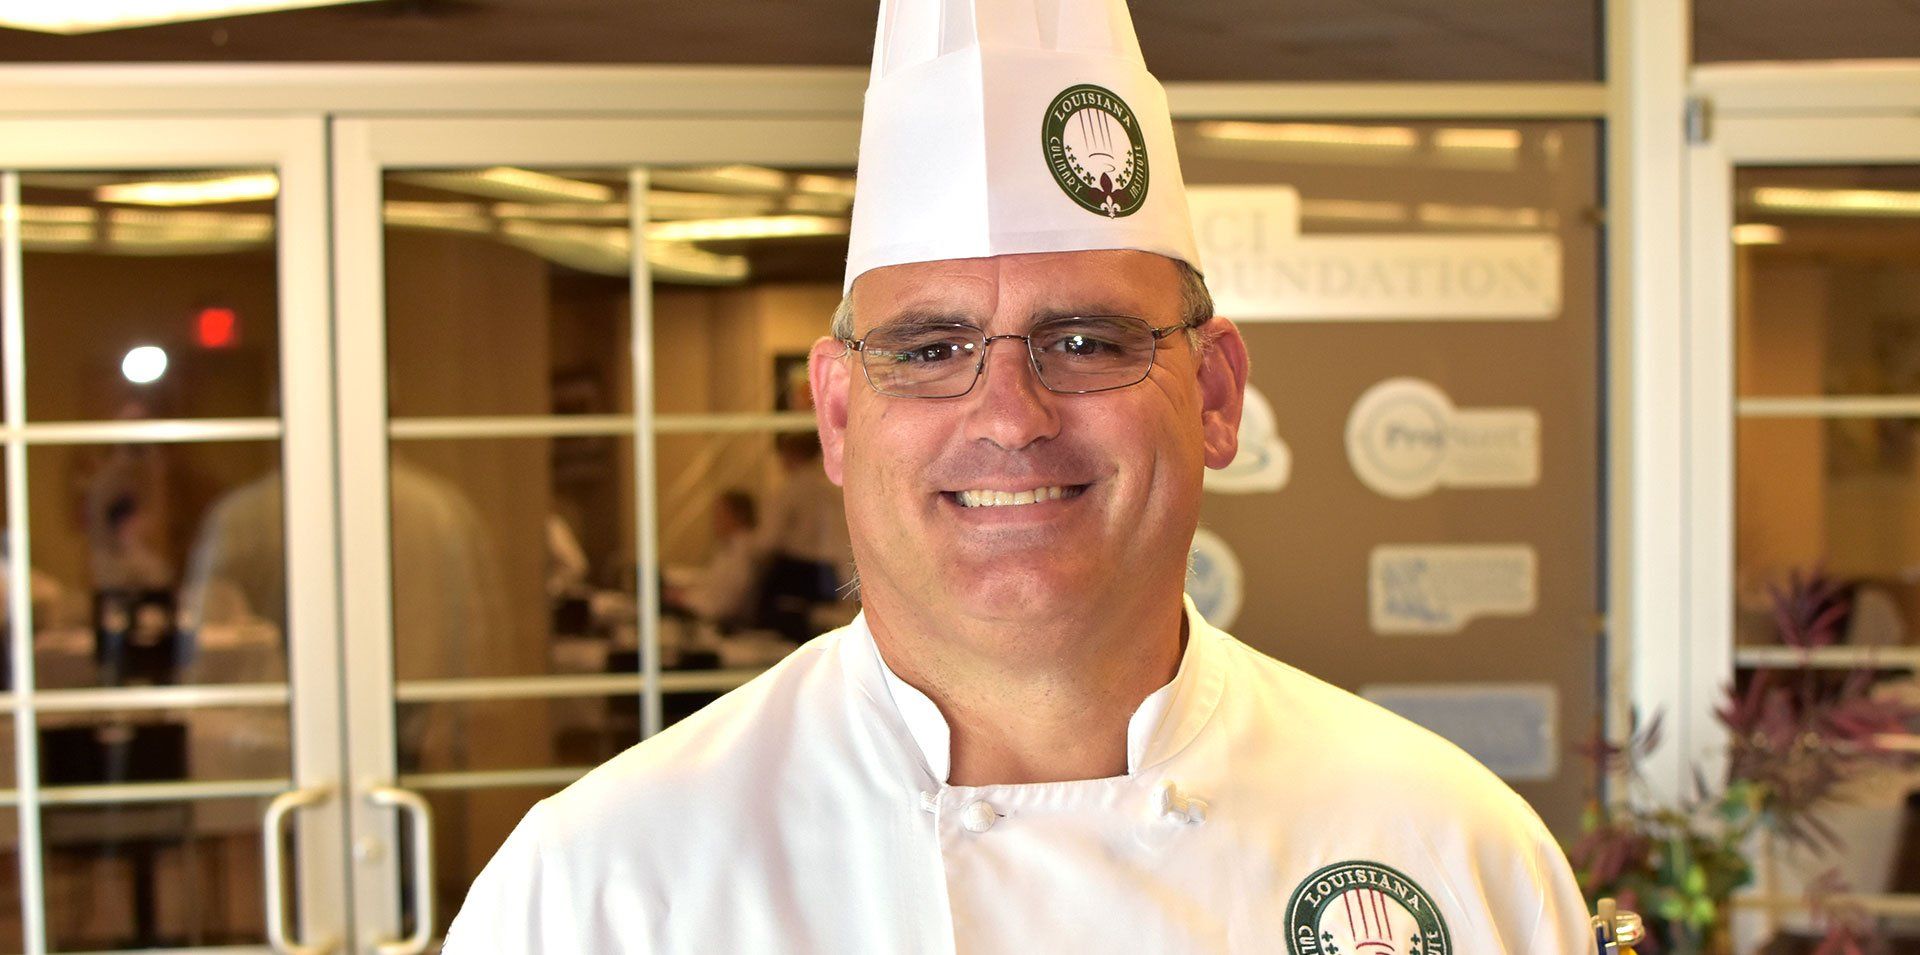 Chef David Tiner Director and Chef Instructor at Louisiana Culinary Institute